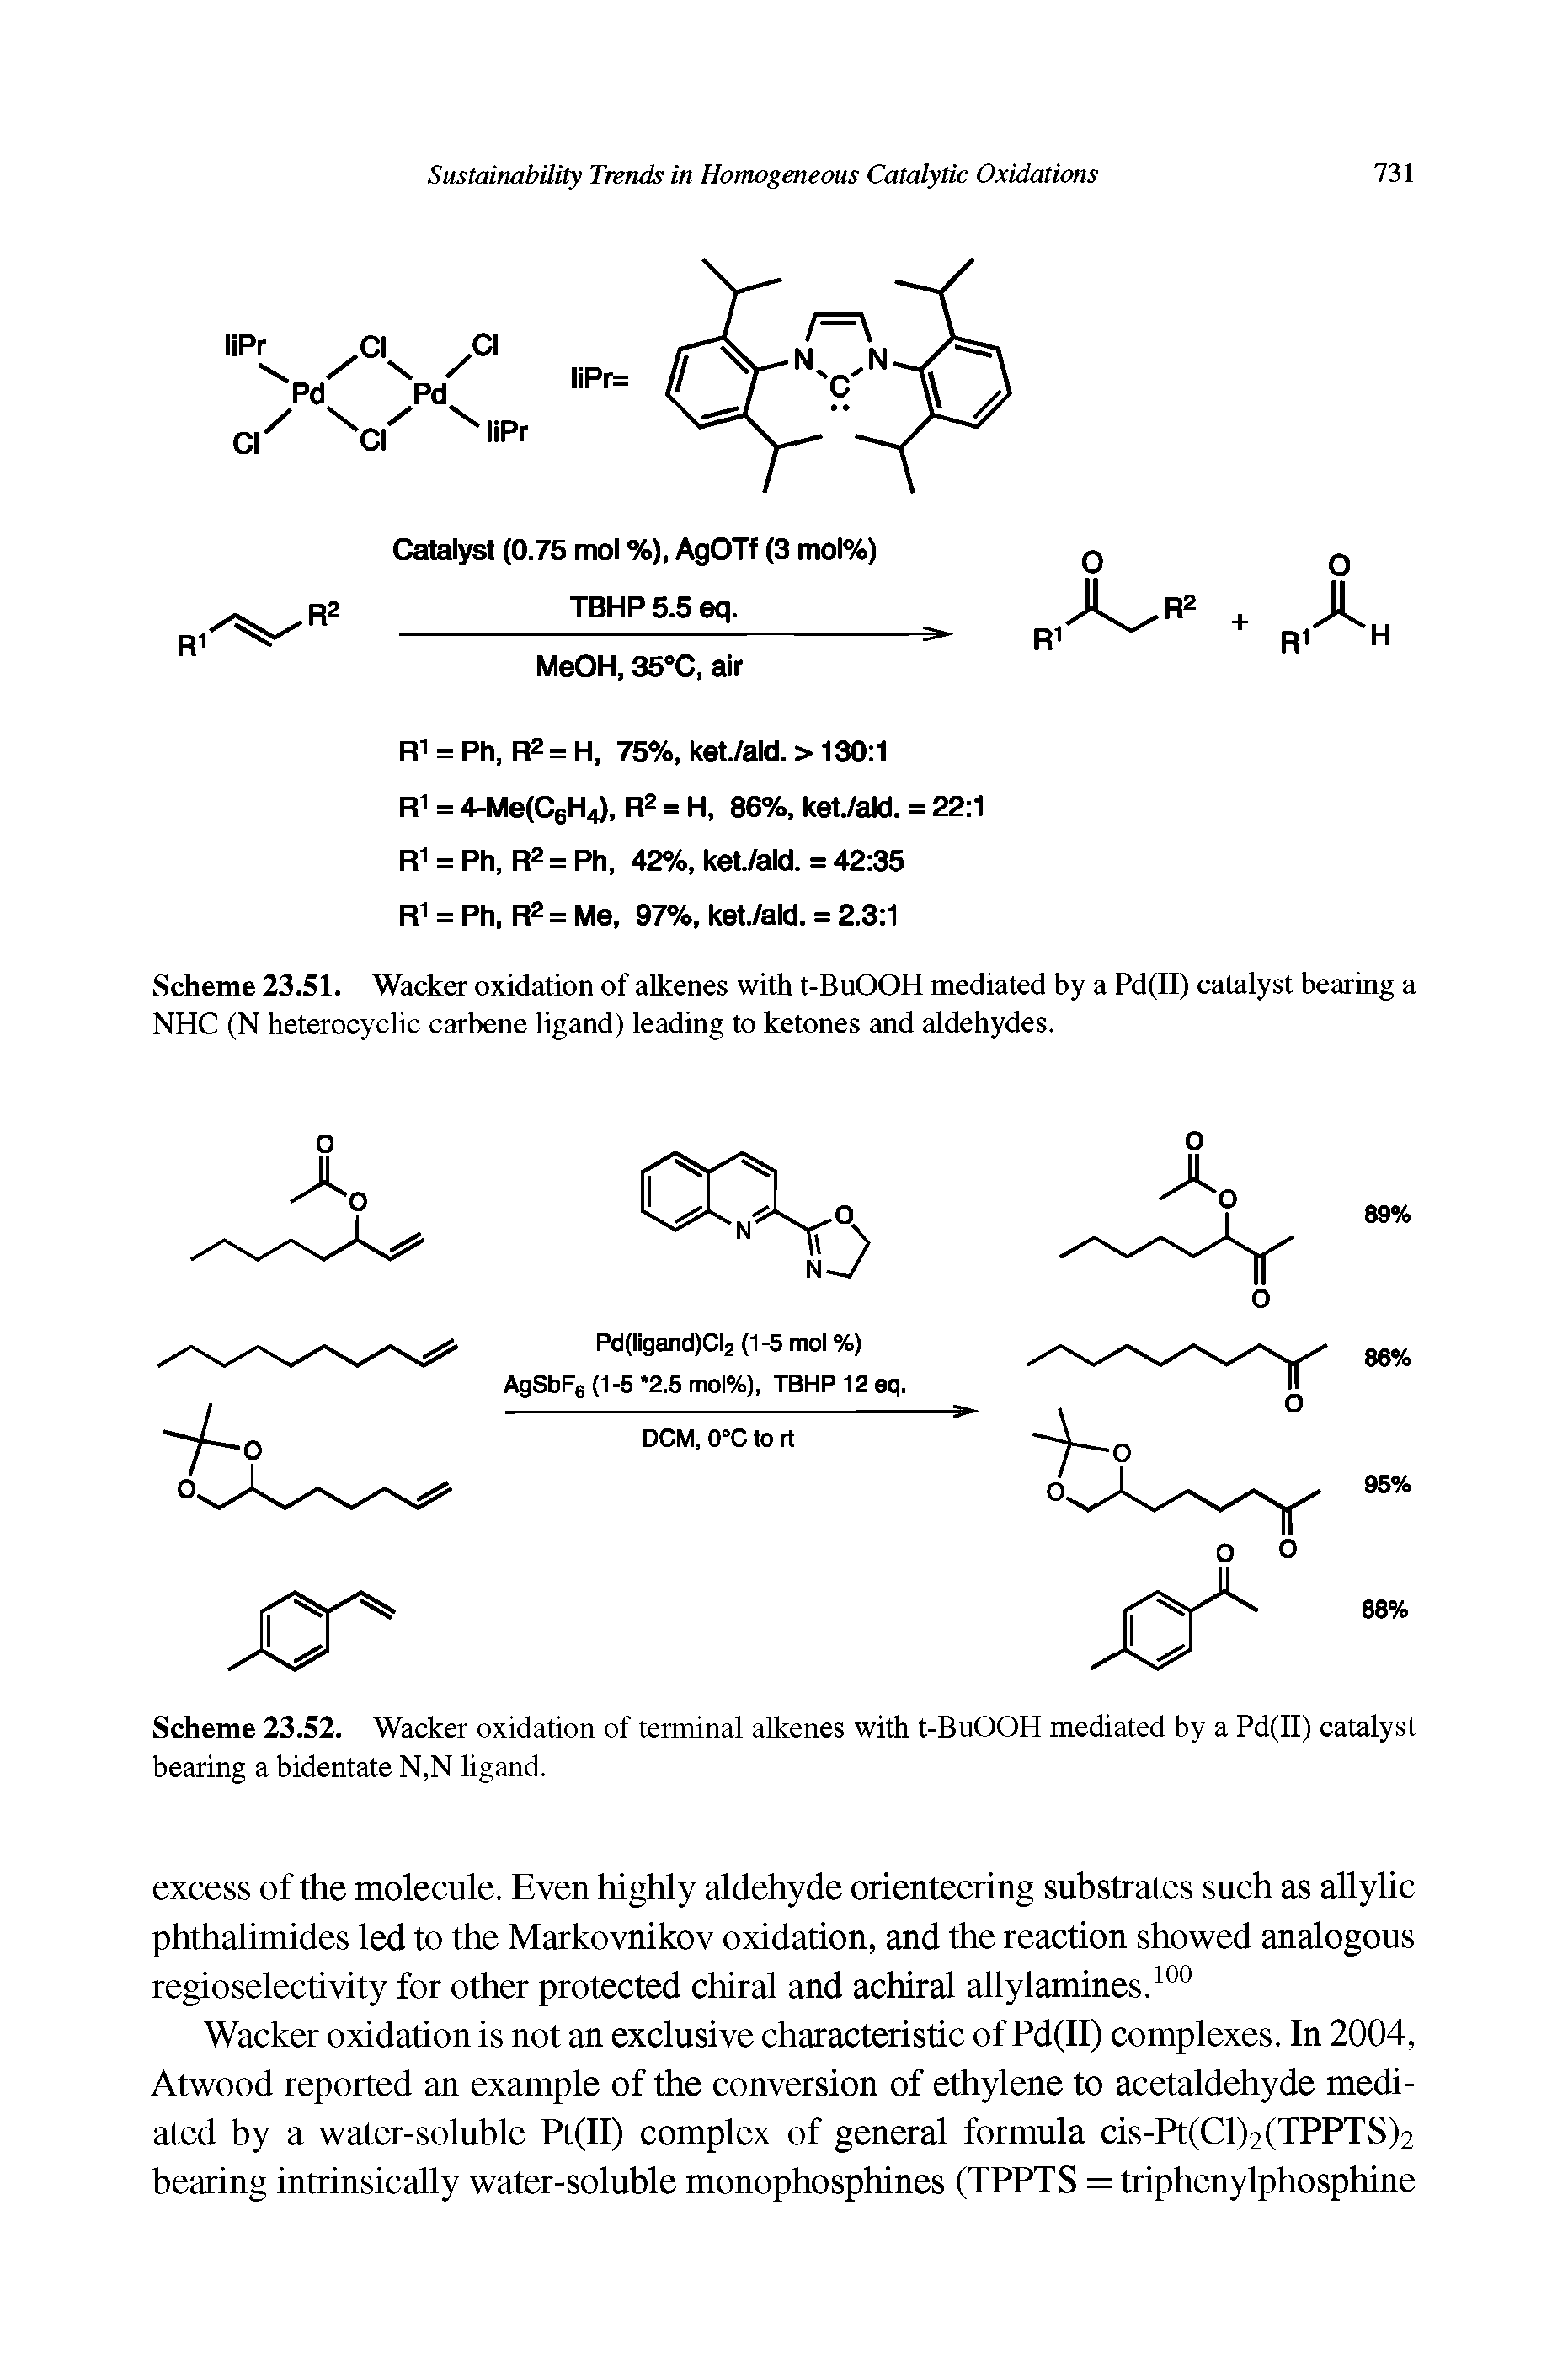 Scheme 23.51. Wacker oxidation of alkenes with t-BuOOH mediated by a Pd(II) catalyst bearing a NHC (N heterocyclic carbene ligand) leading to ketones and aldehydes.